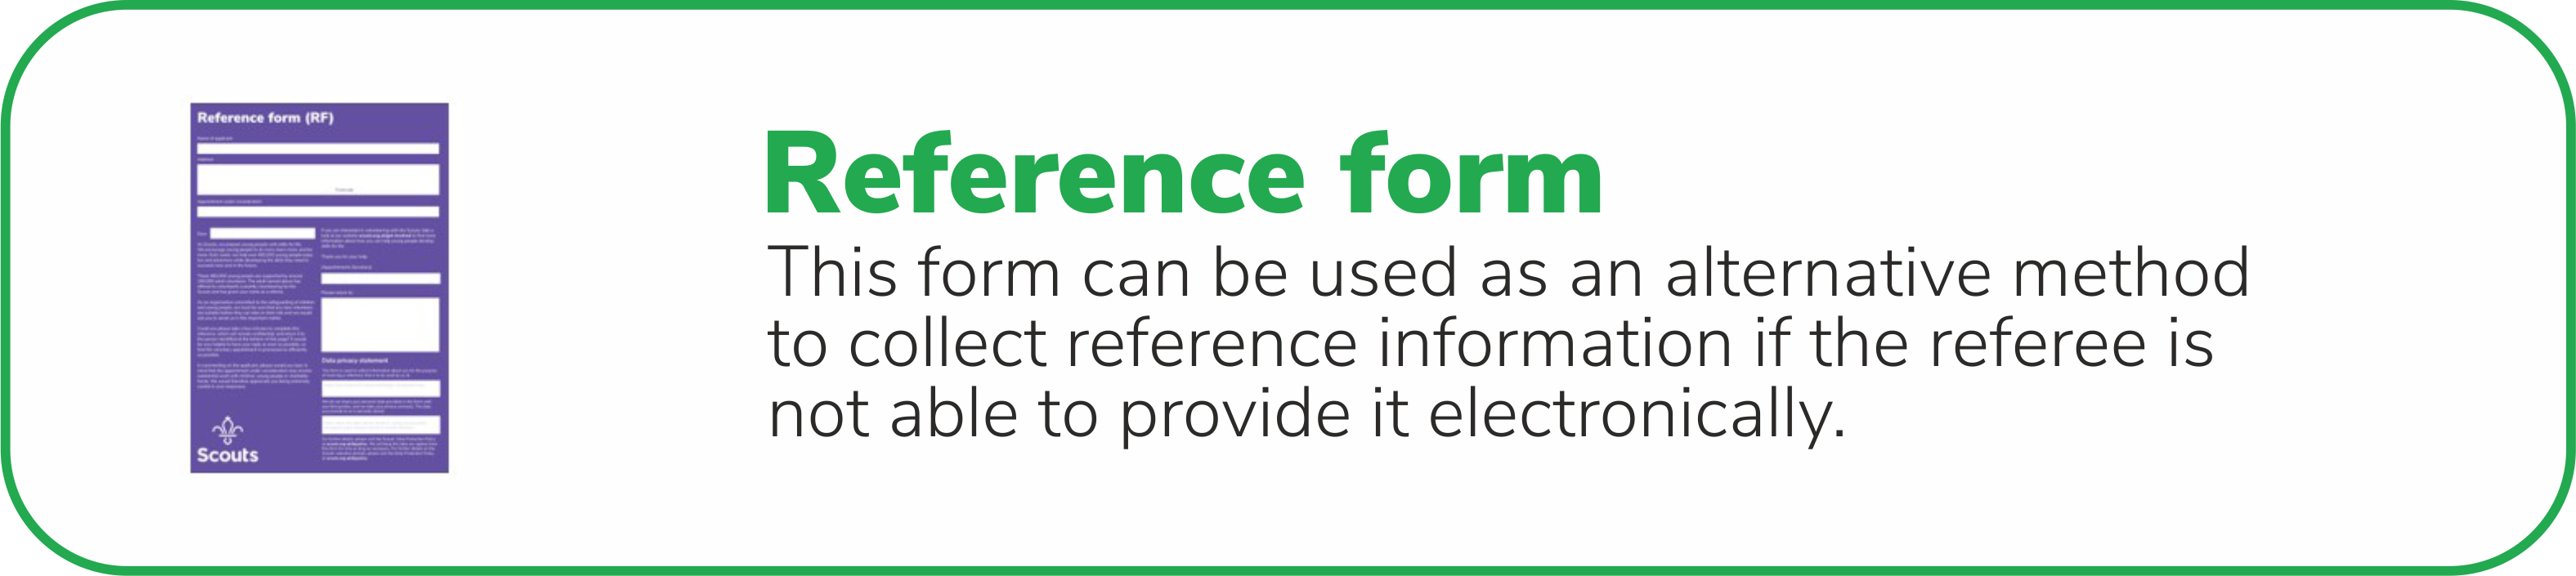 Reference form 